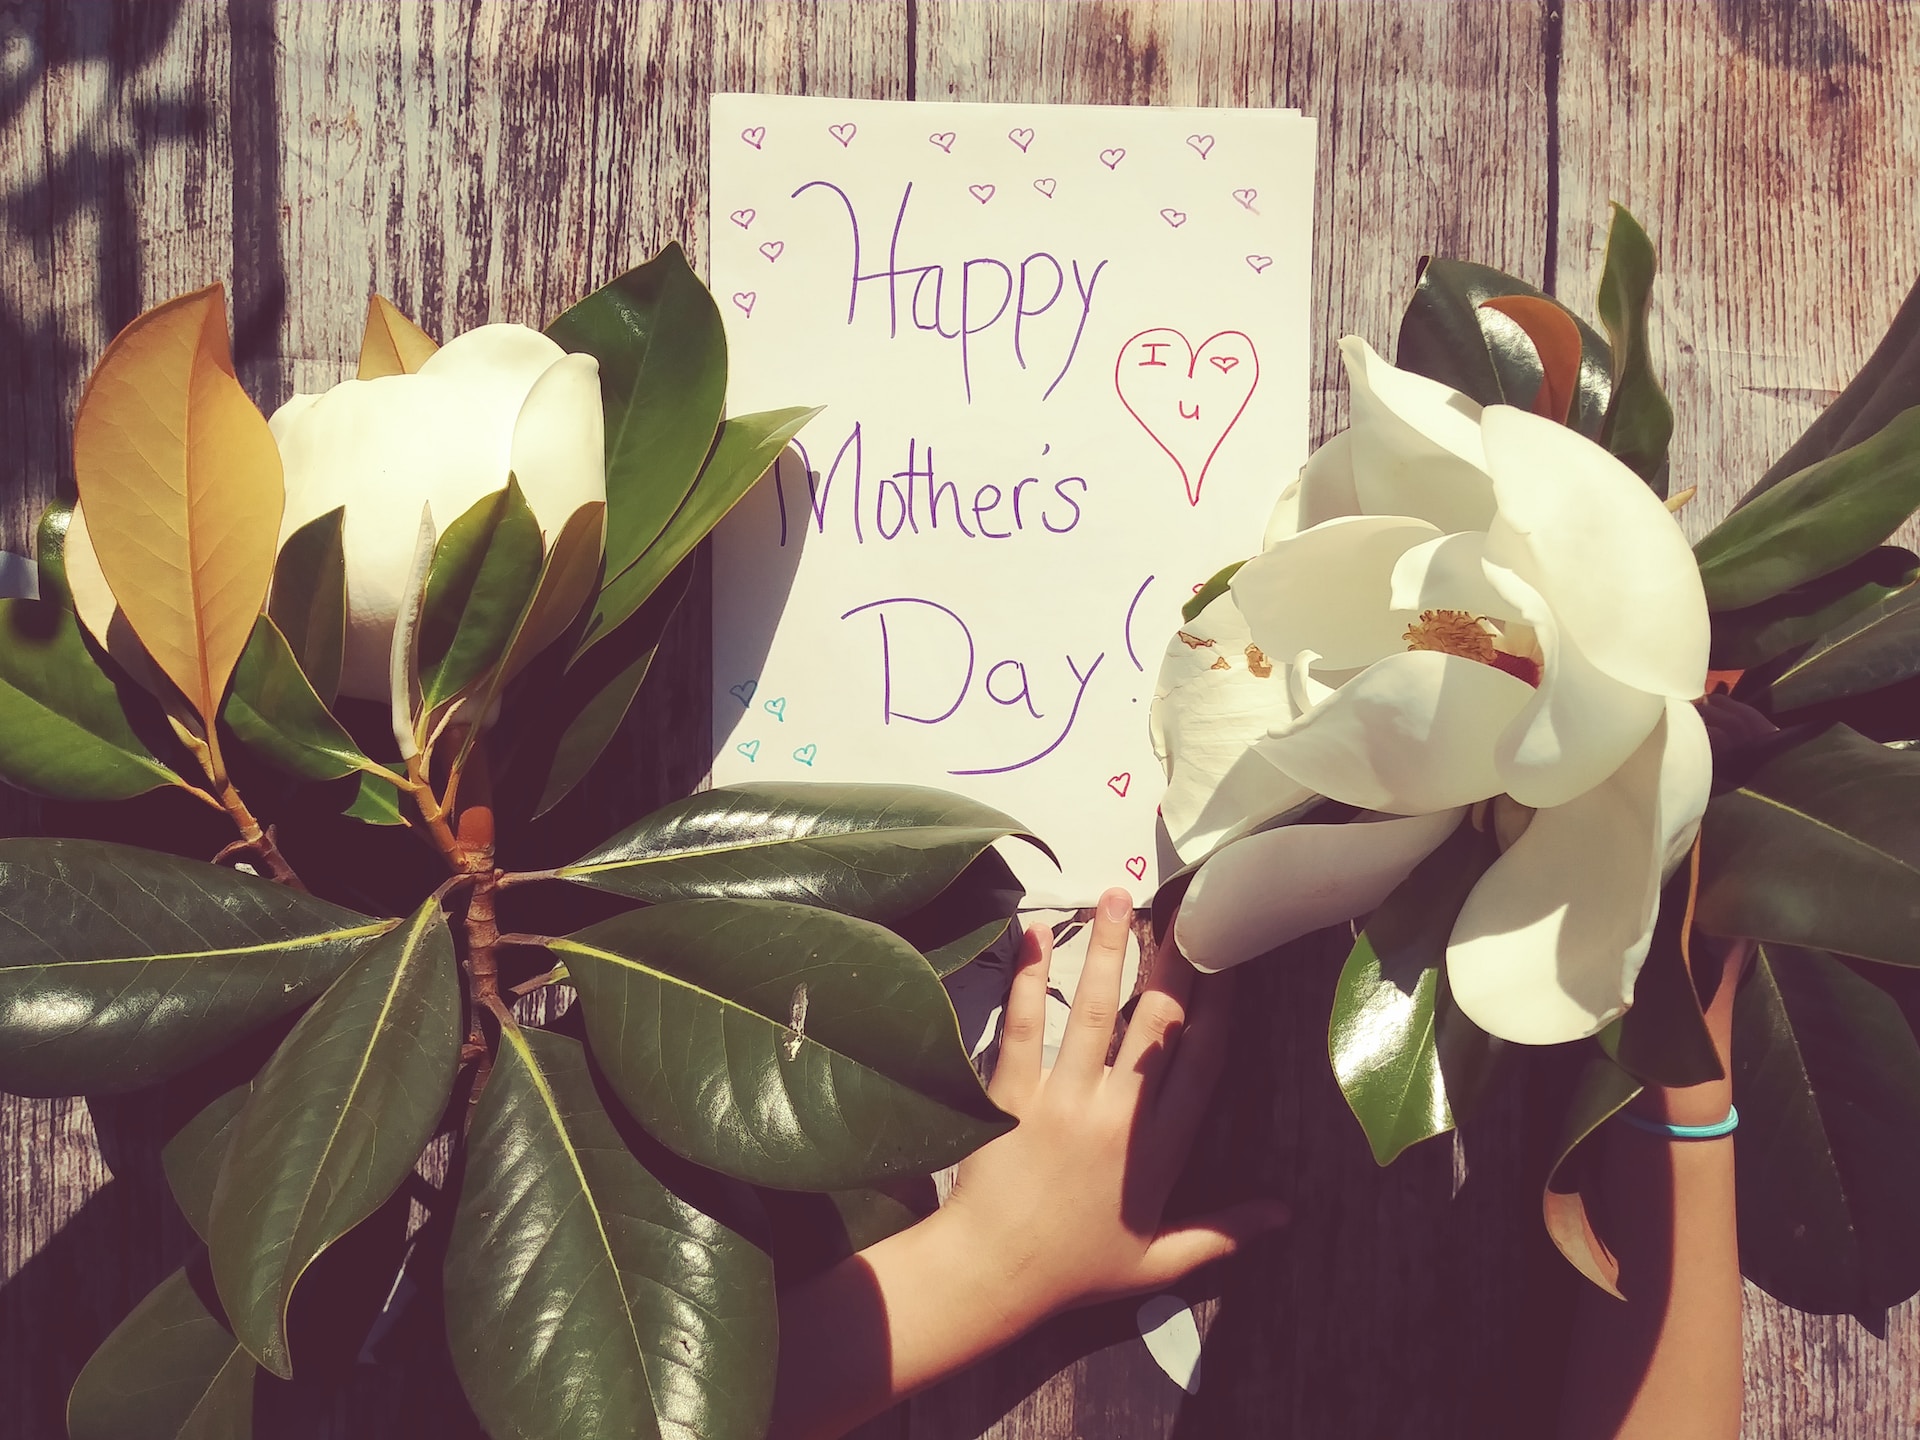 happy mother's day wish in a paper glued in a wooden fence with a children's hand on it